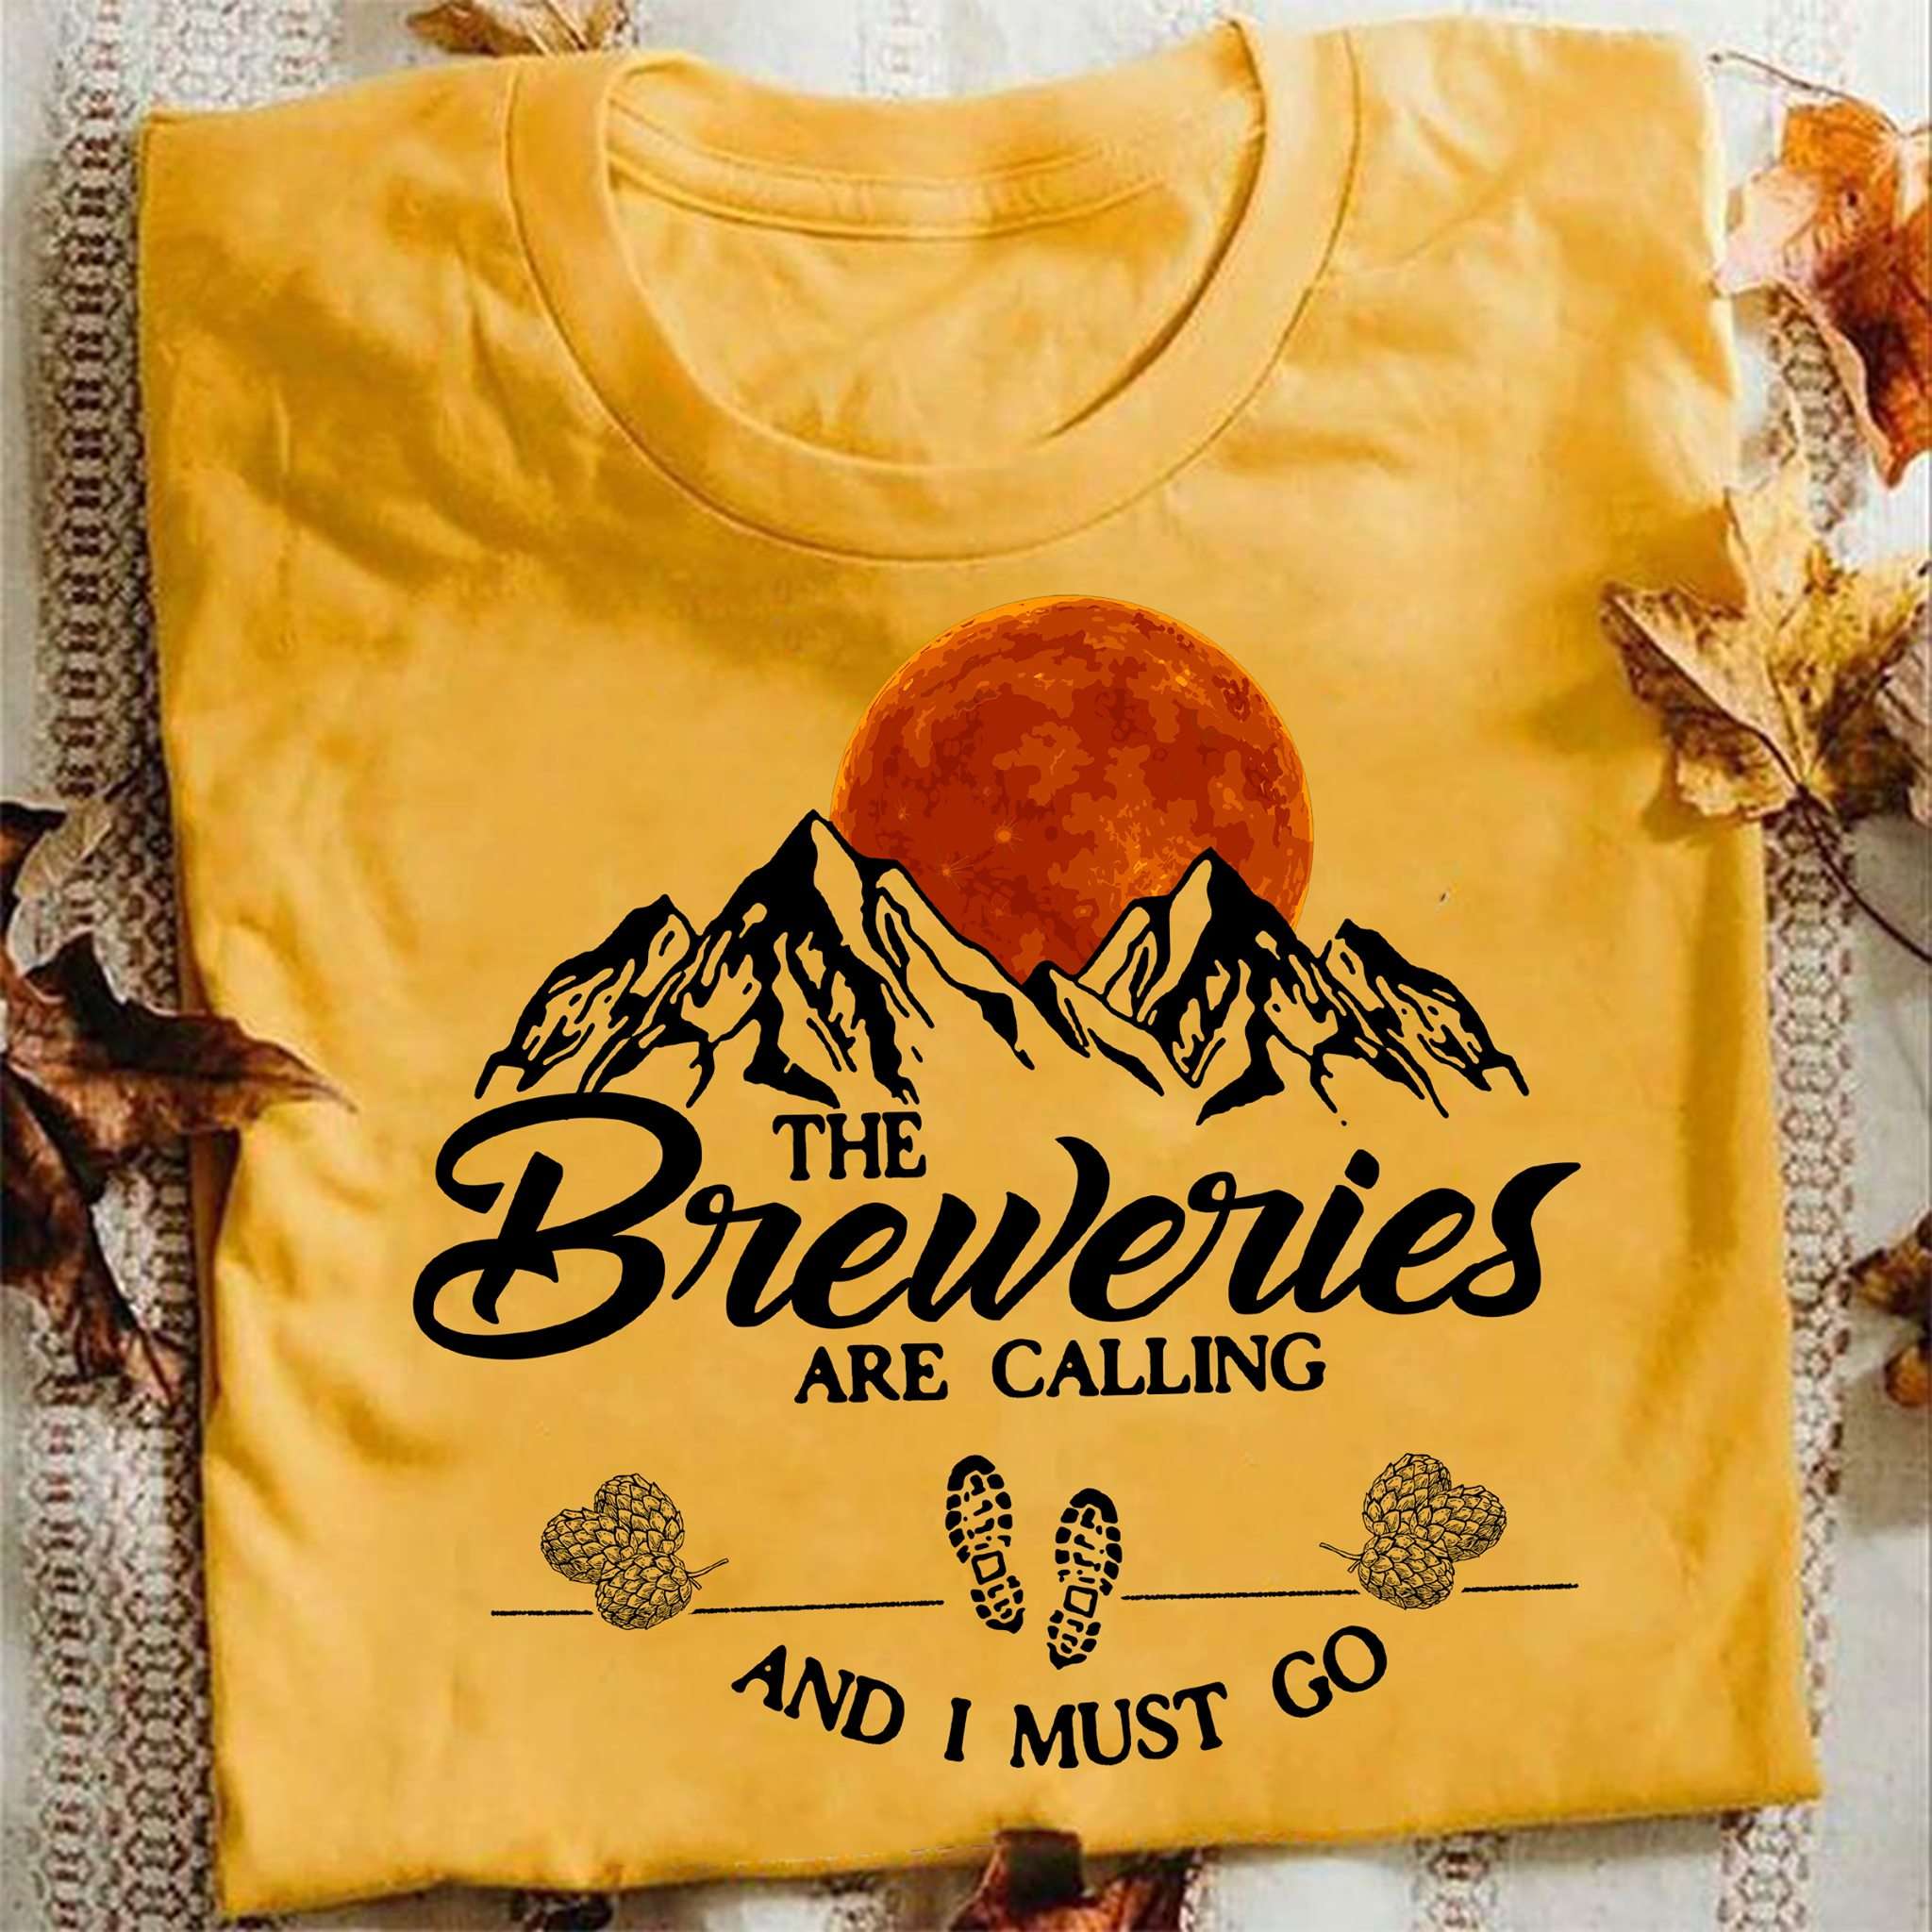 The breweries are calling and I must go - Breweries mountain, Mountain scenic views